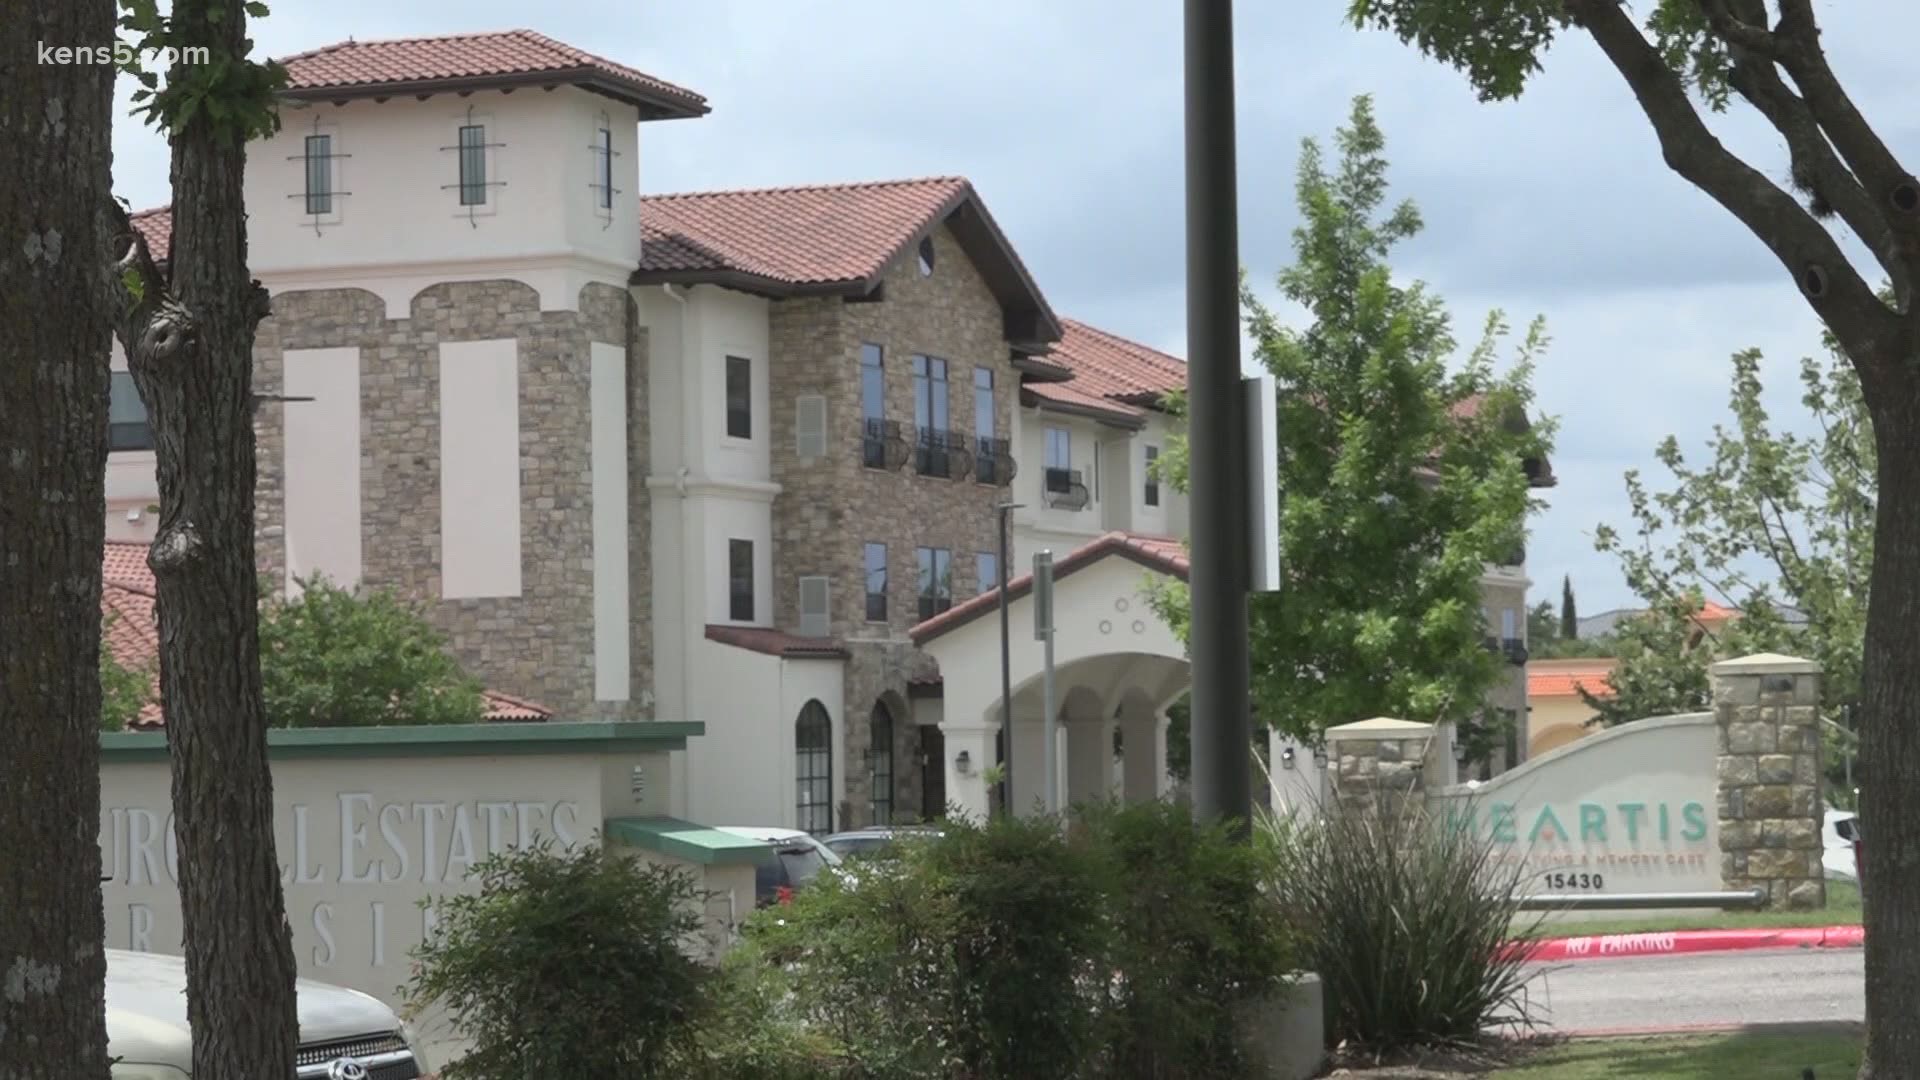 Dozens of people at a San Antonio assisted living facility are reportedly being isolated.